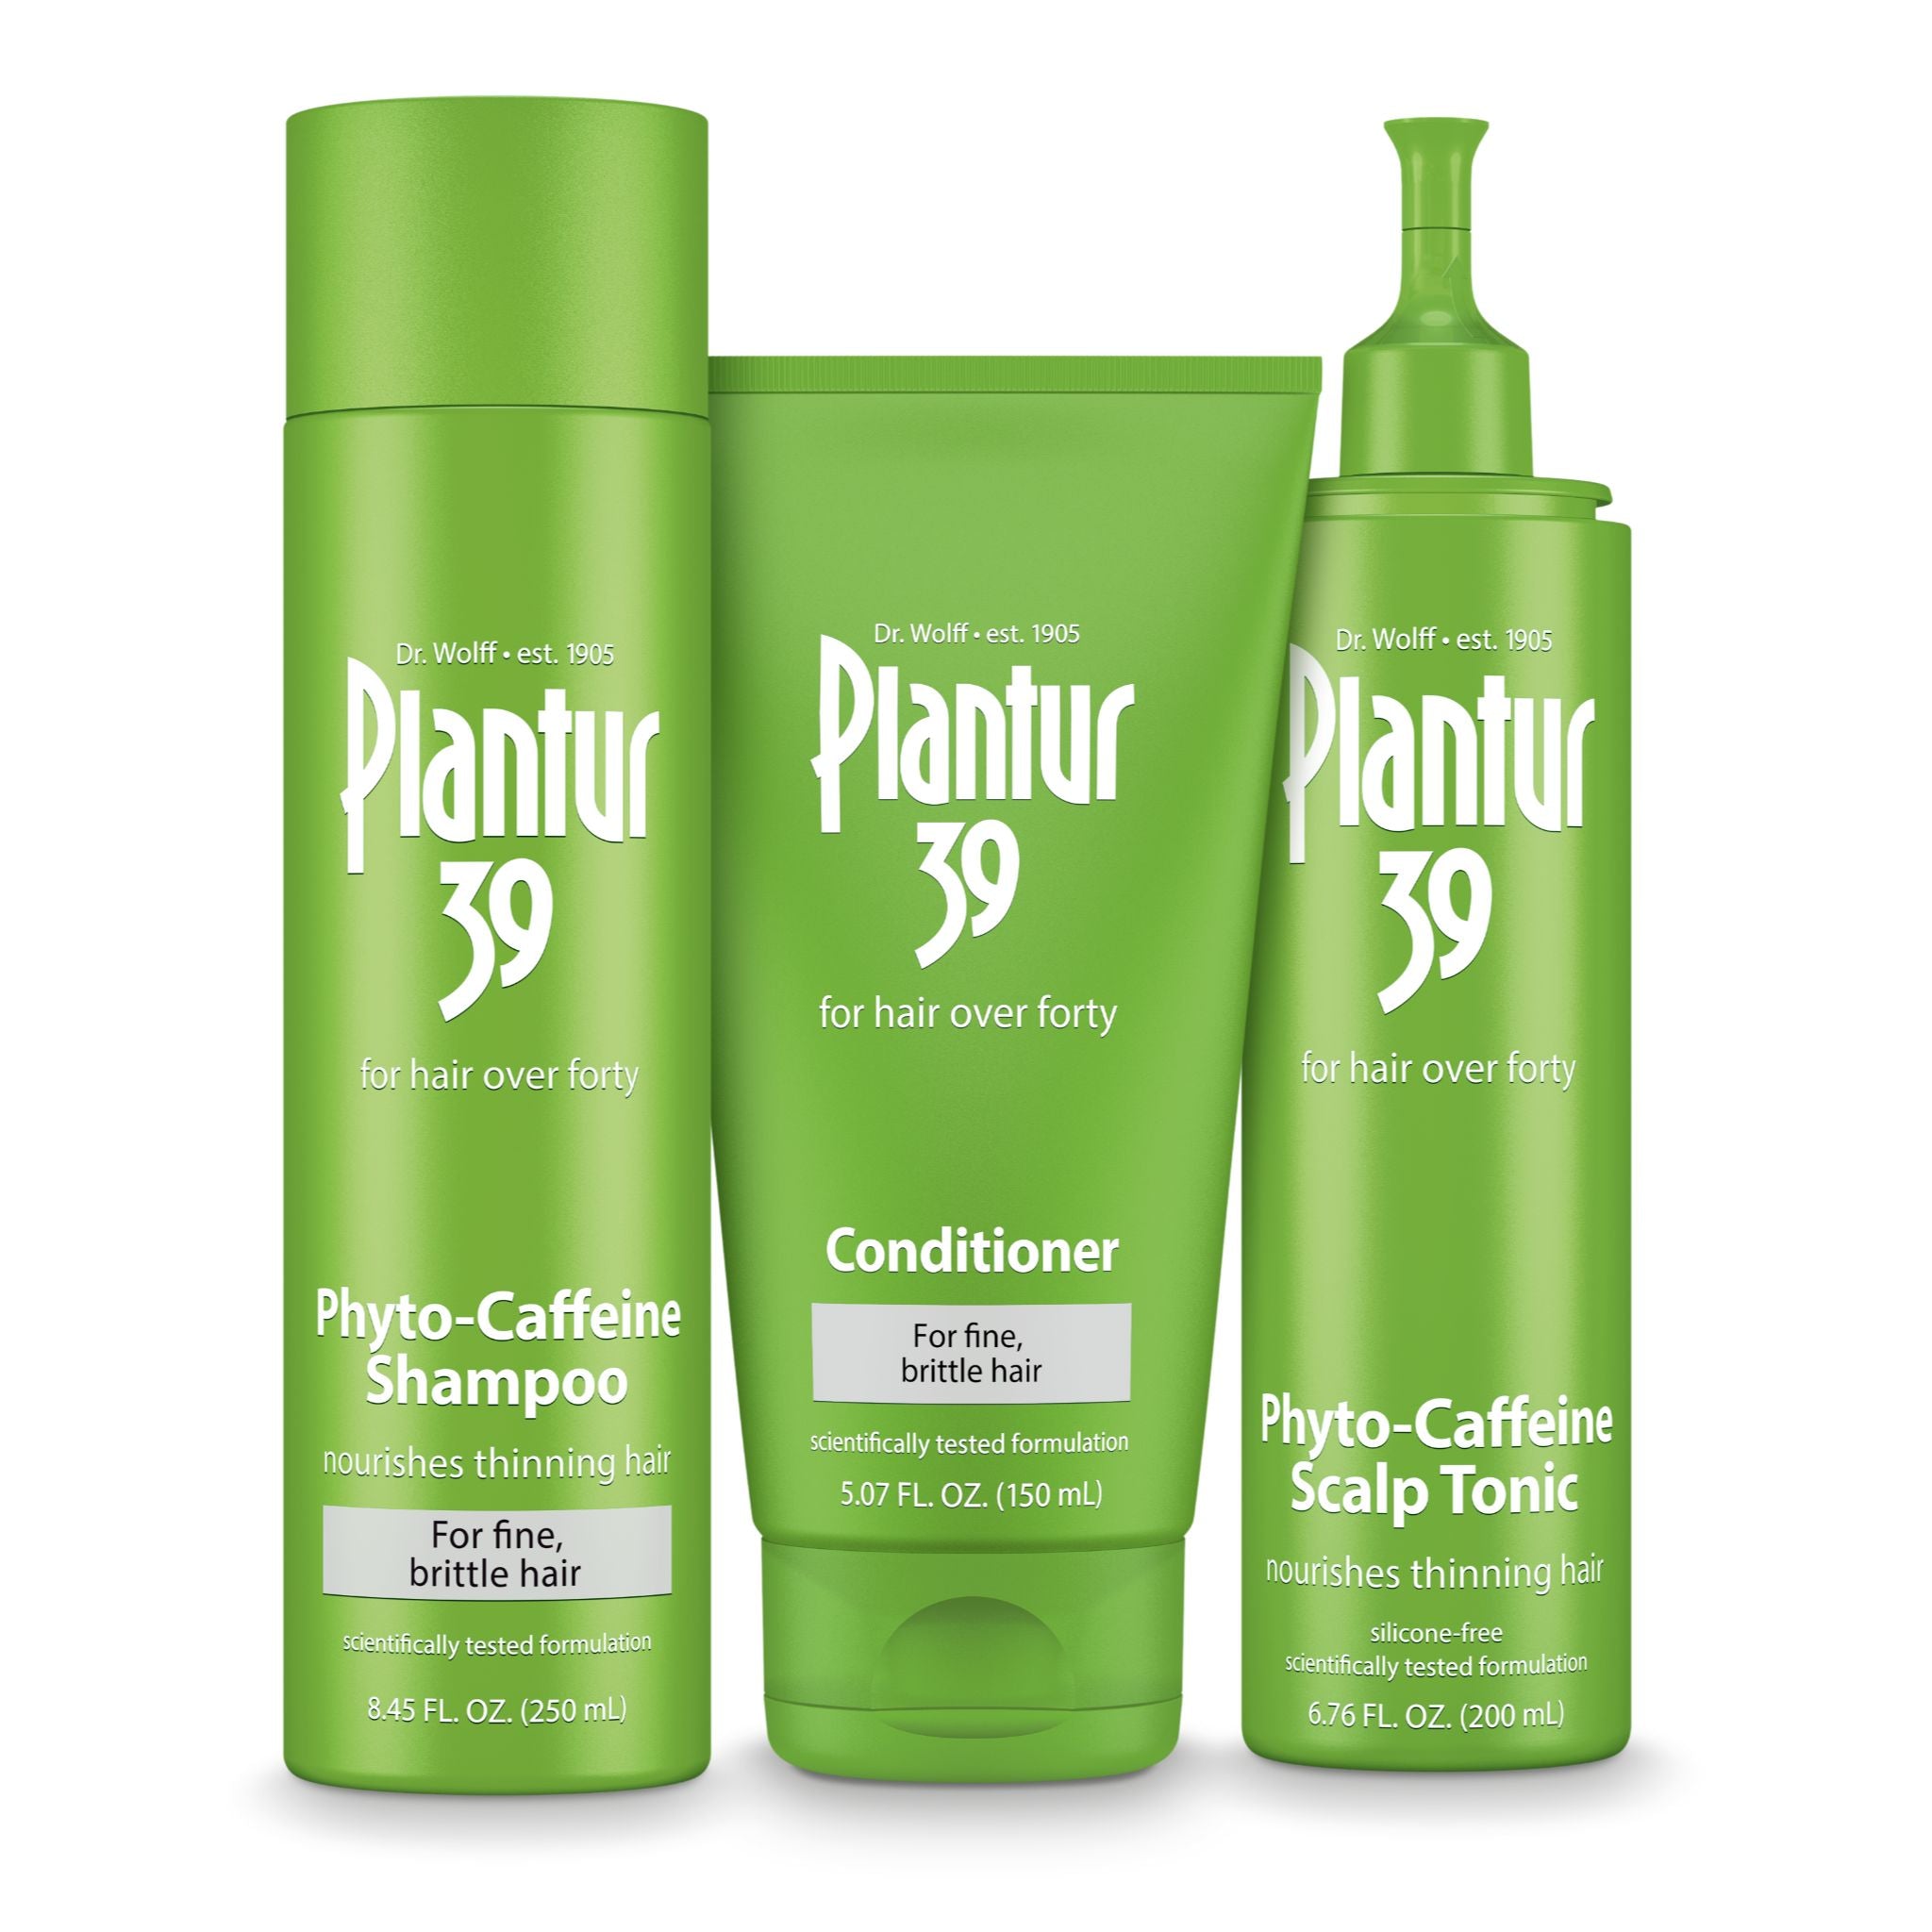 Plantur 39 Phyto-Caffeine Made For You 3-Step System for Fine, Brittle Hair